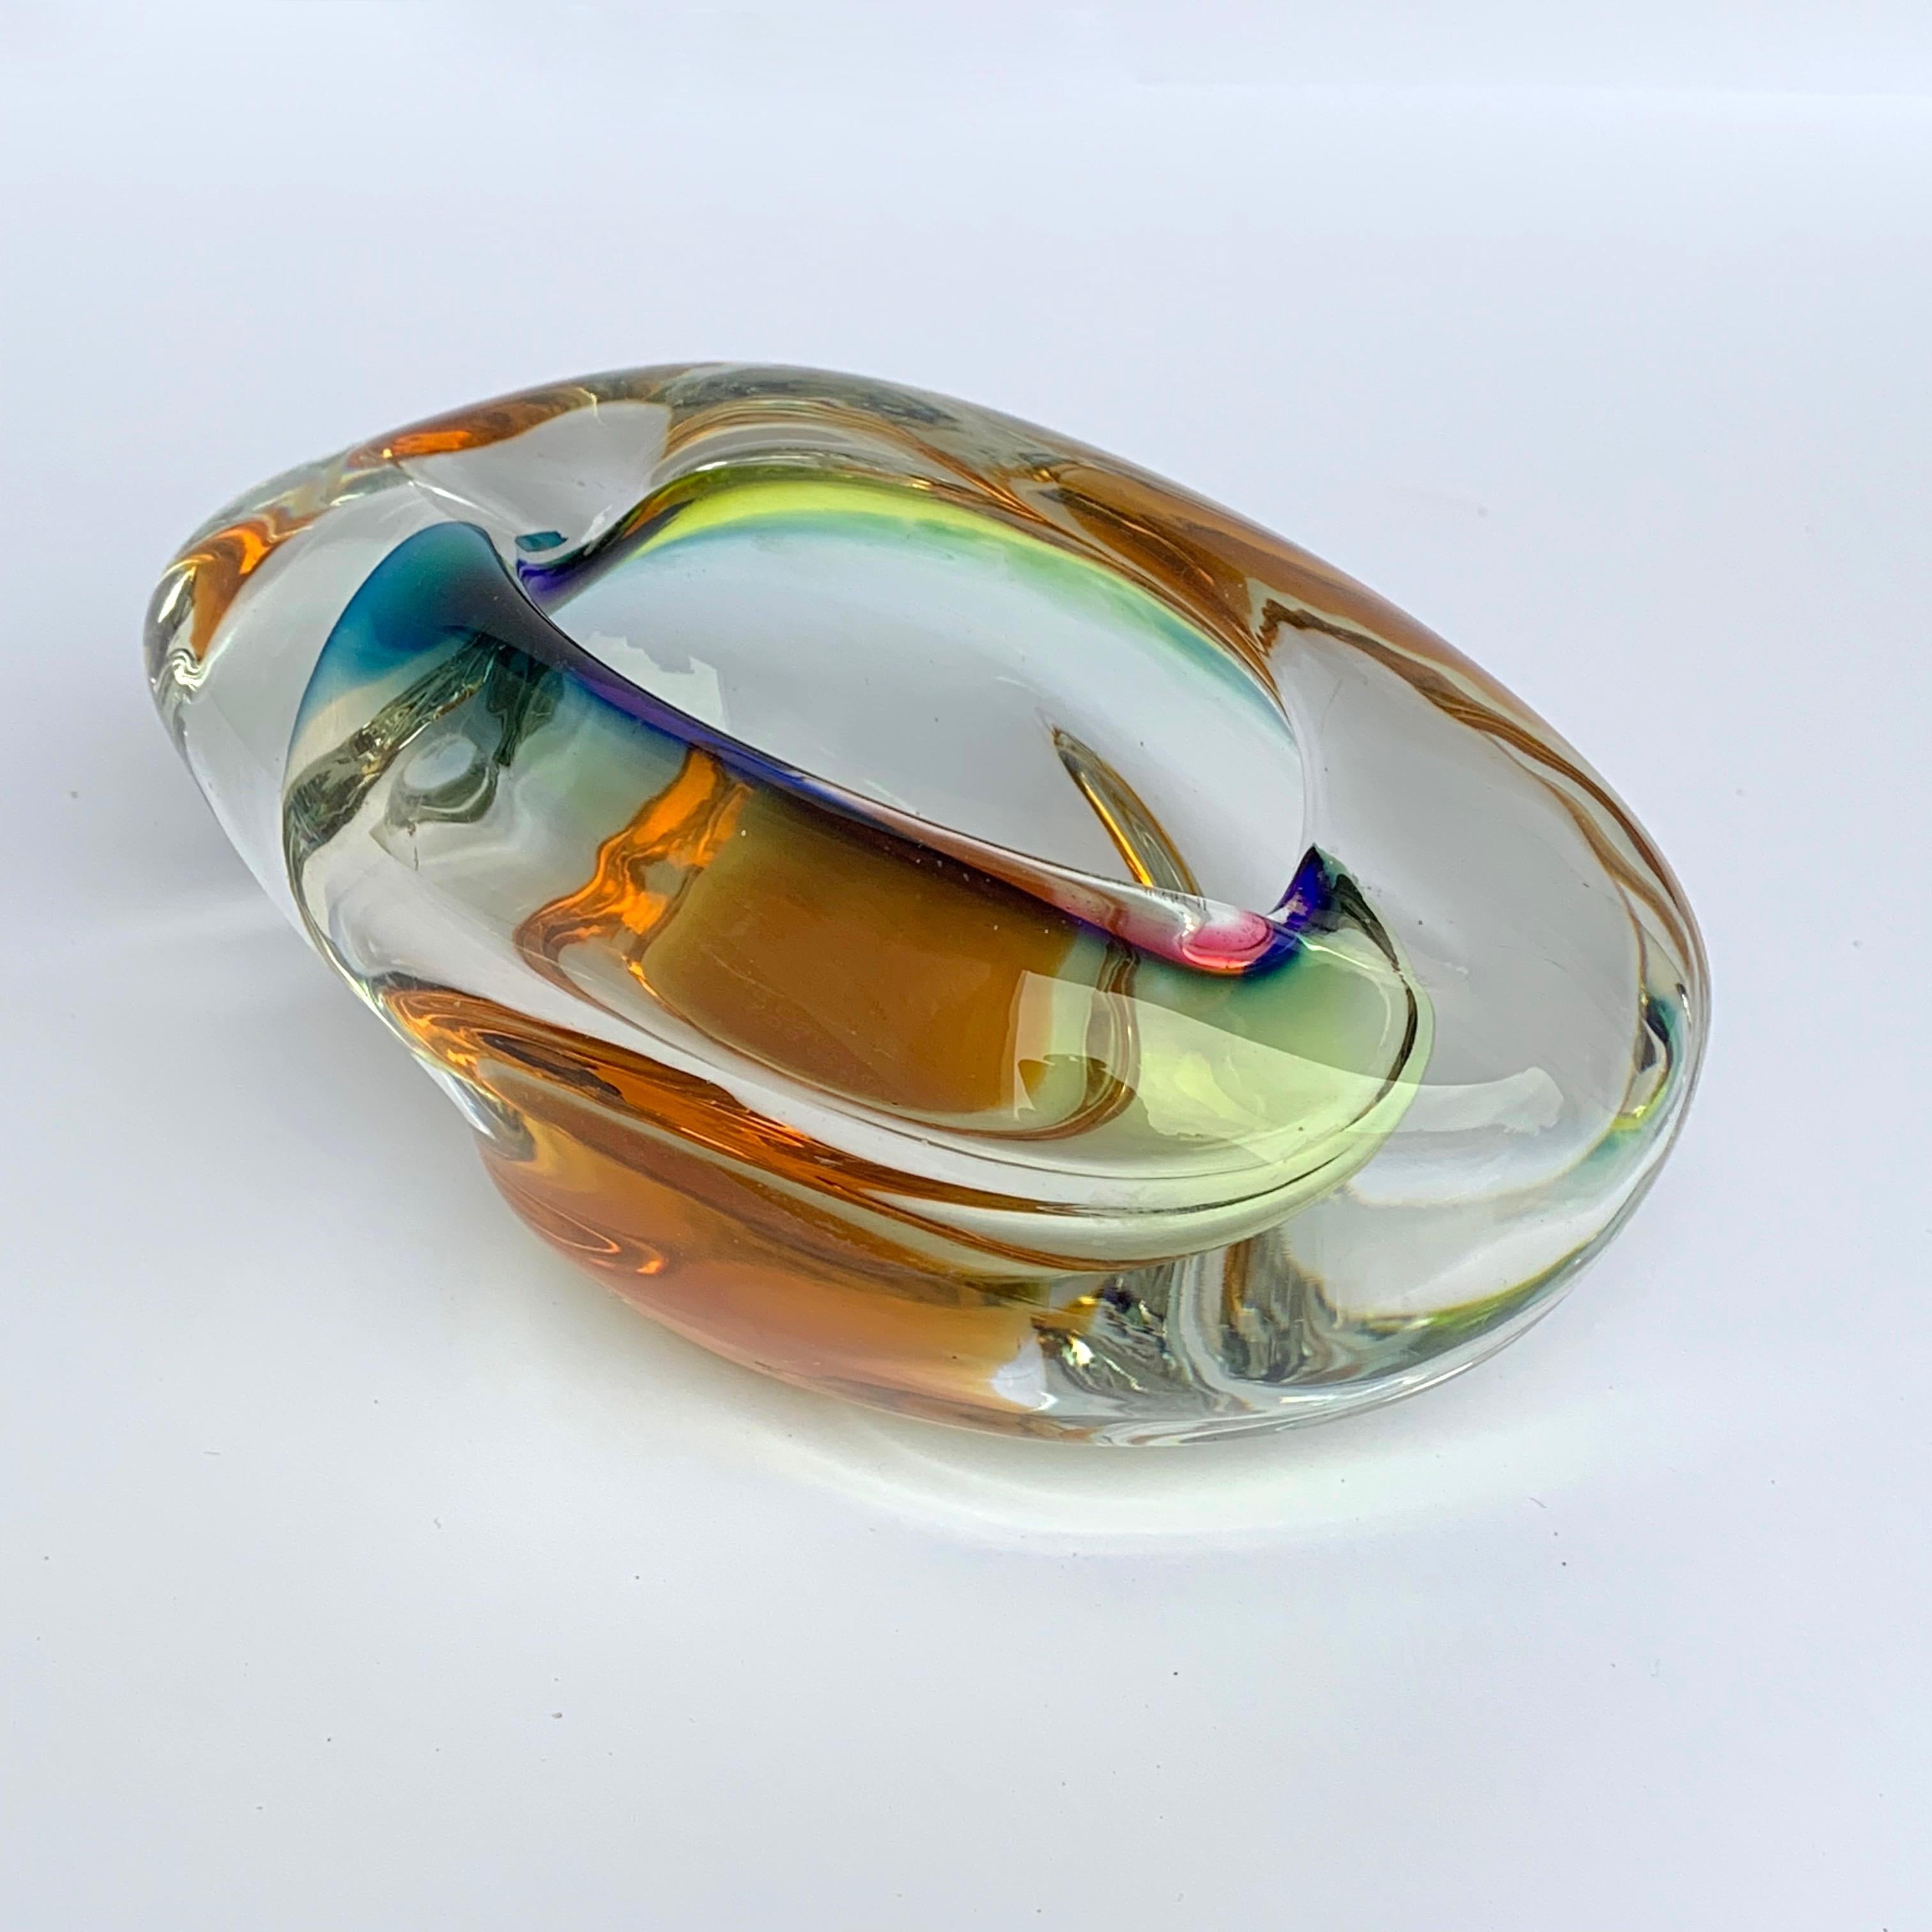 A beautiful glass of multi-color of Murano.
Ashtray or bowl, submerged glass

No chipping.
 